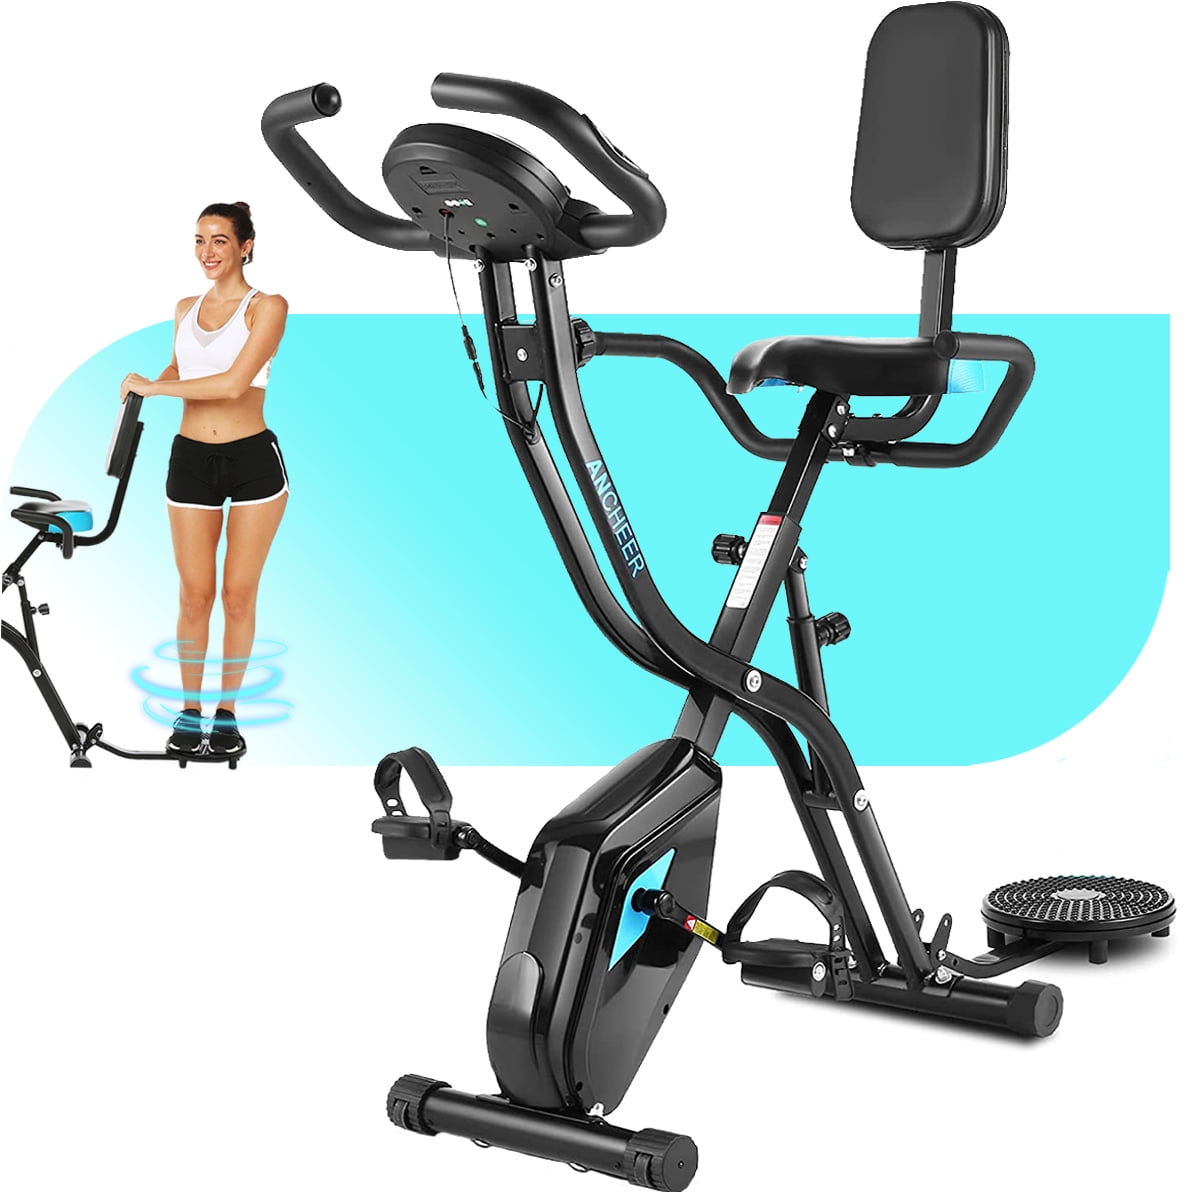 Details about   Exercise Bike Workout Health Fitness Portable Upright Exercise Calories Burned 